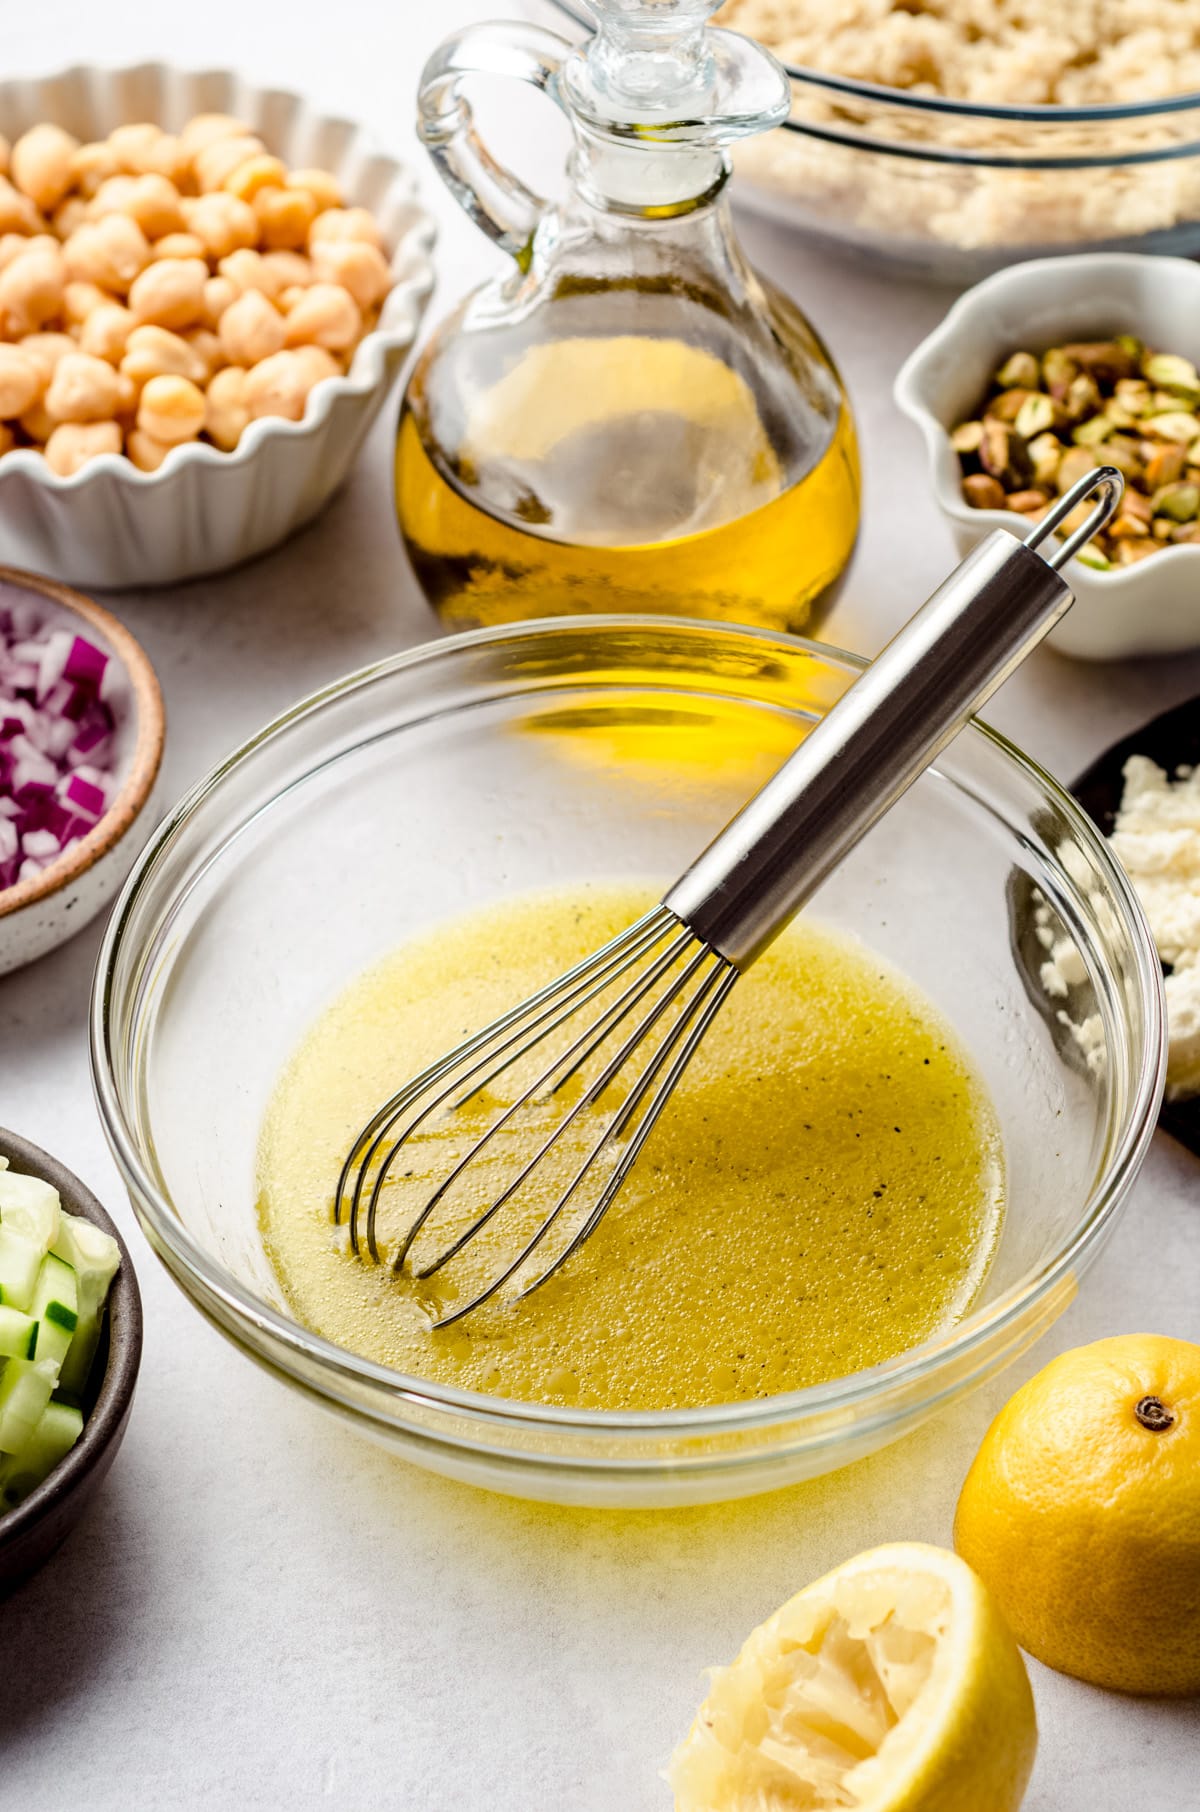 Simple salad dressing made from lemon juice, olive oil, salt and pepper in a glass bowl with a whisk sitting in it.